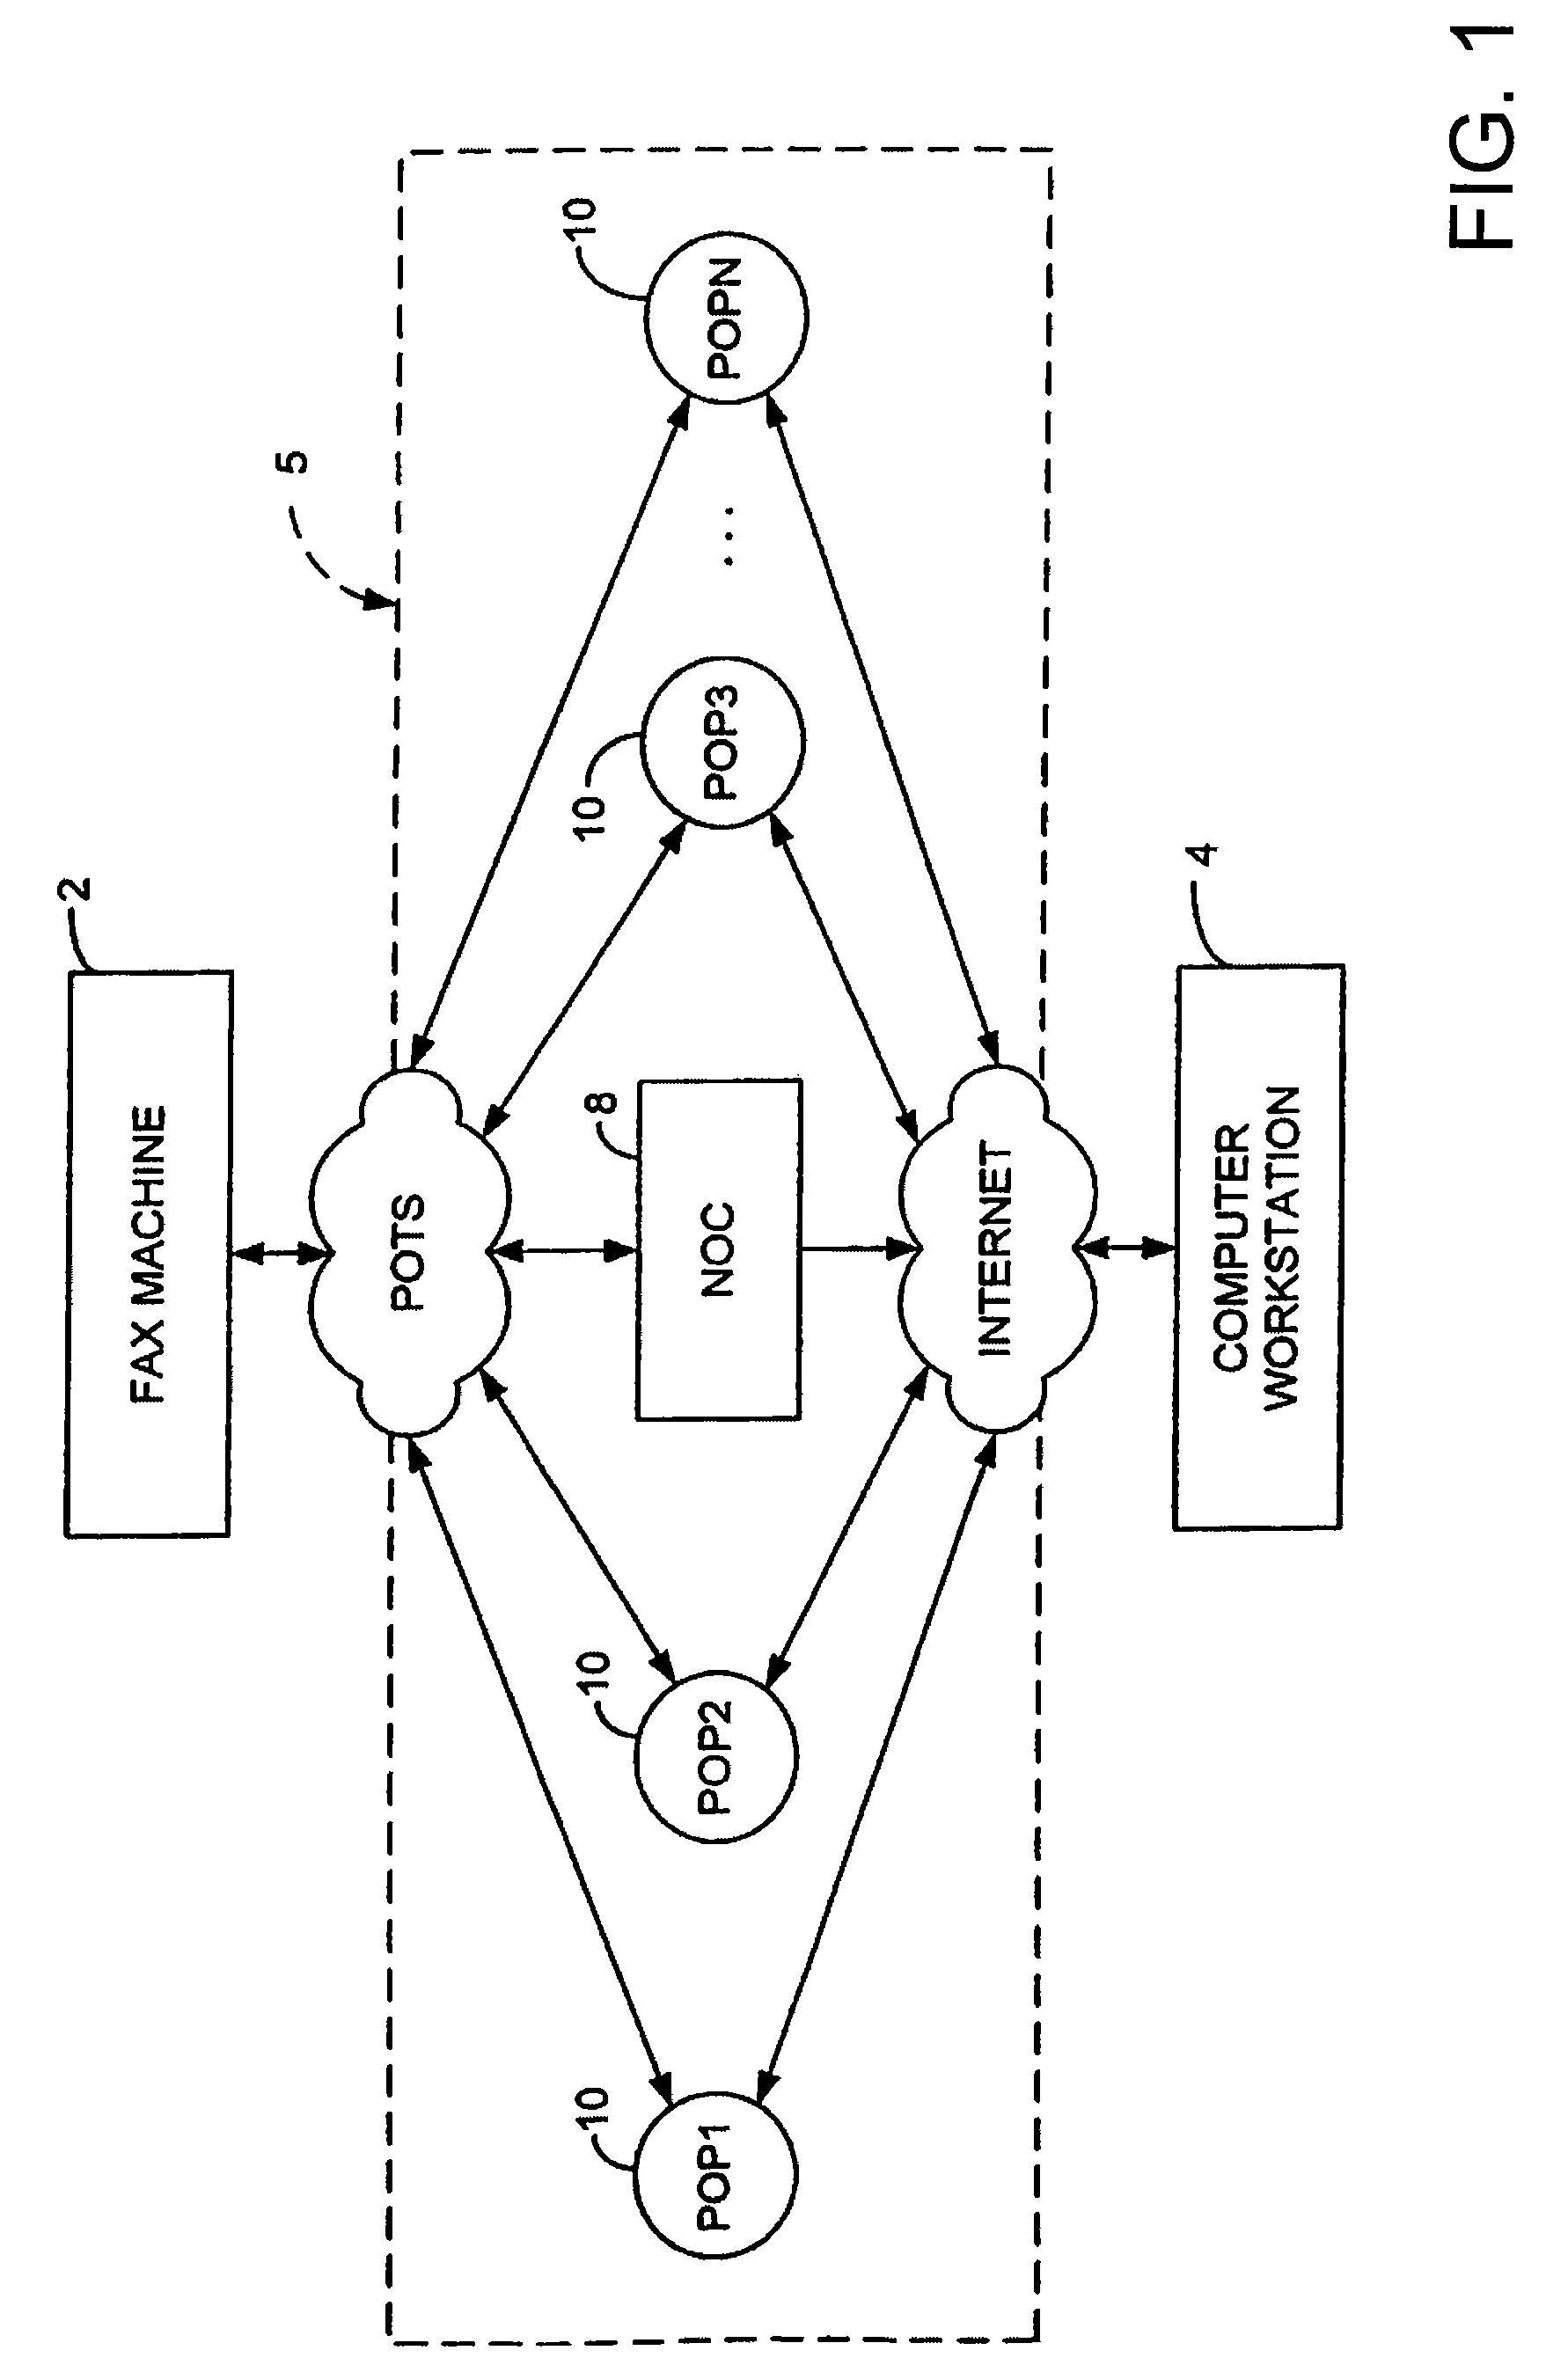 Methods and apparatus for manipulating and providing facsimile transmissions to electronic storage destinations